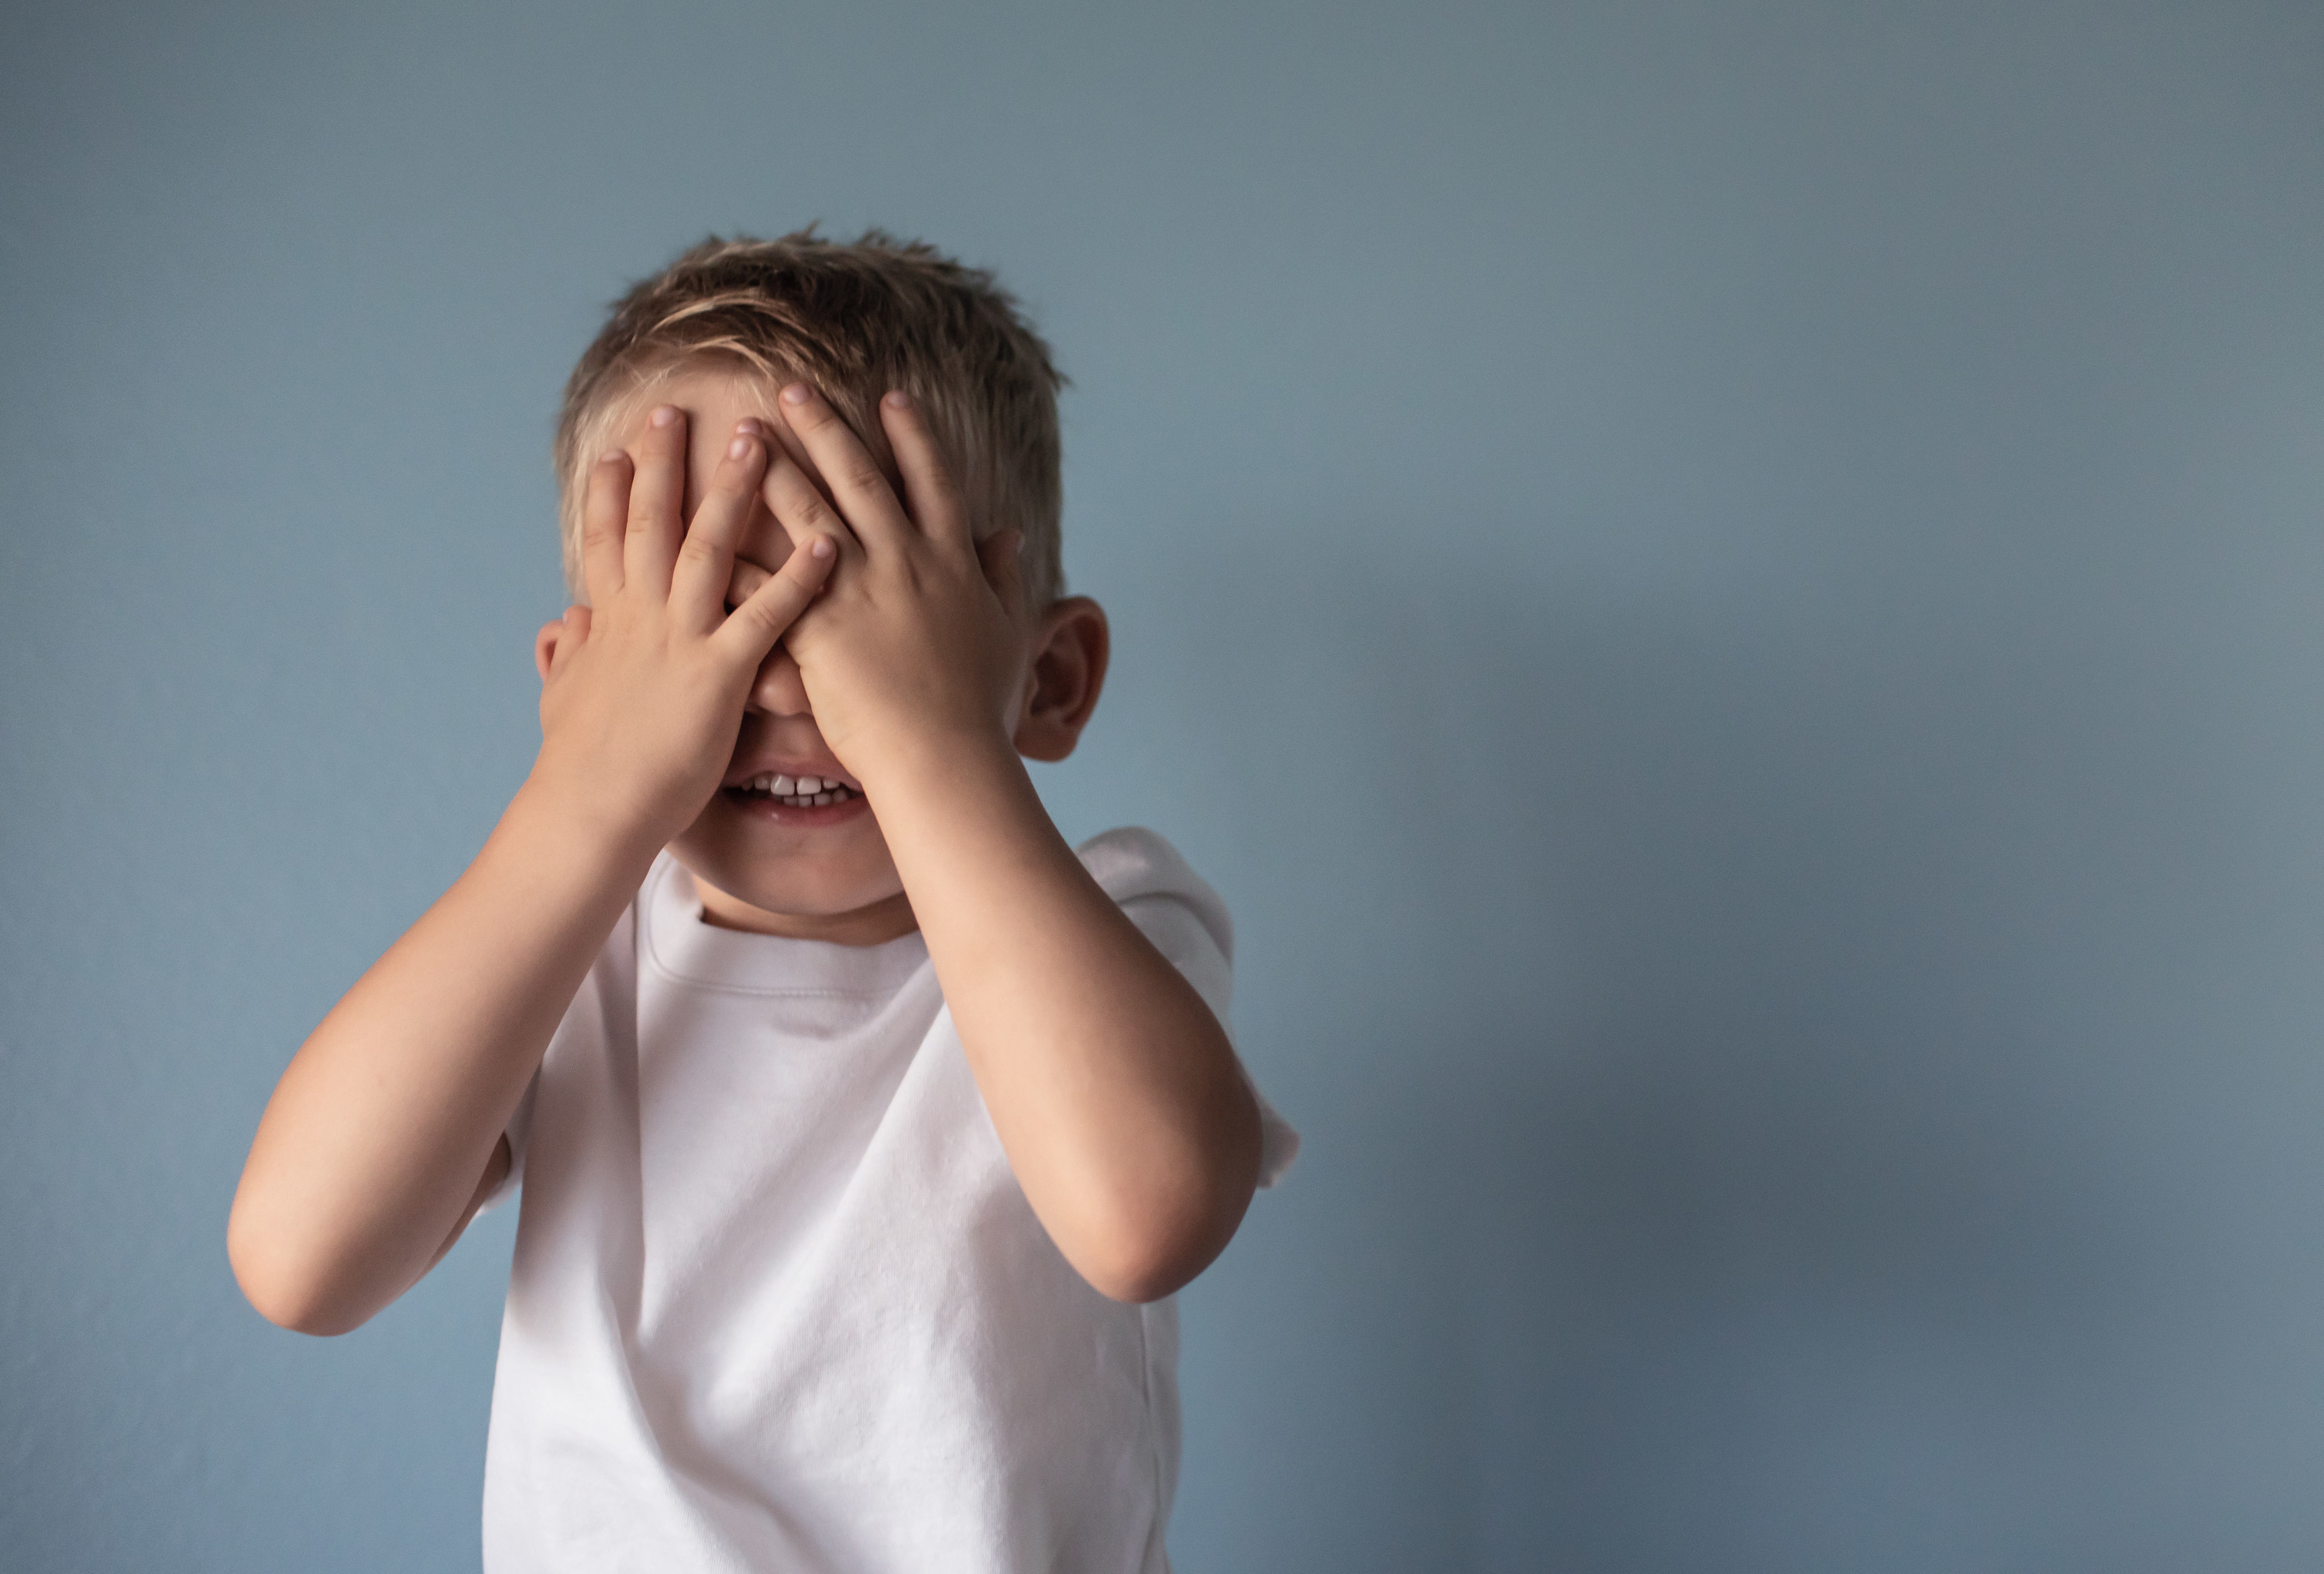 Little boy covering his eyes against gray background